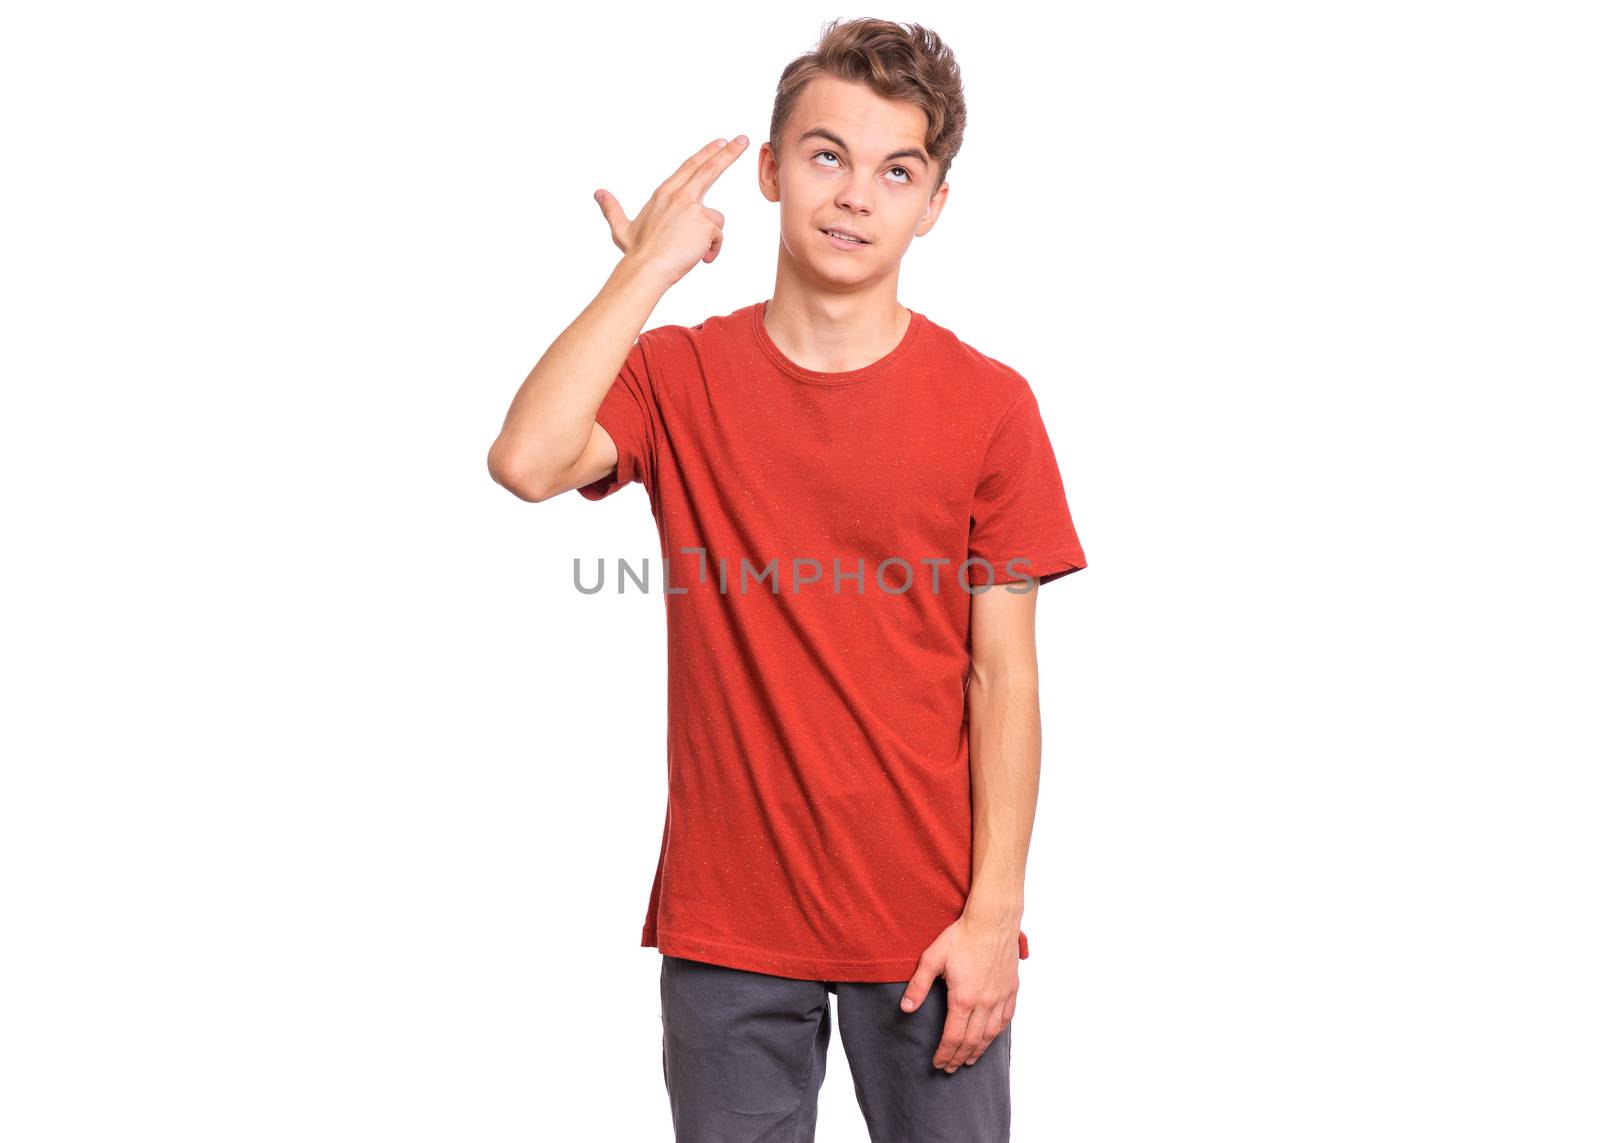 Handsome teen boy pointing hand and fingers to head like gun, suicide gesture, isolated on white background